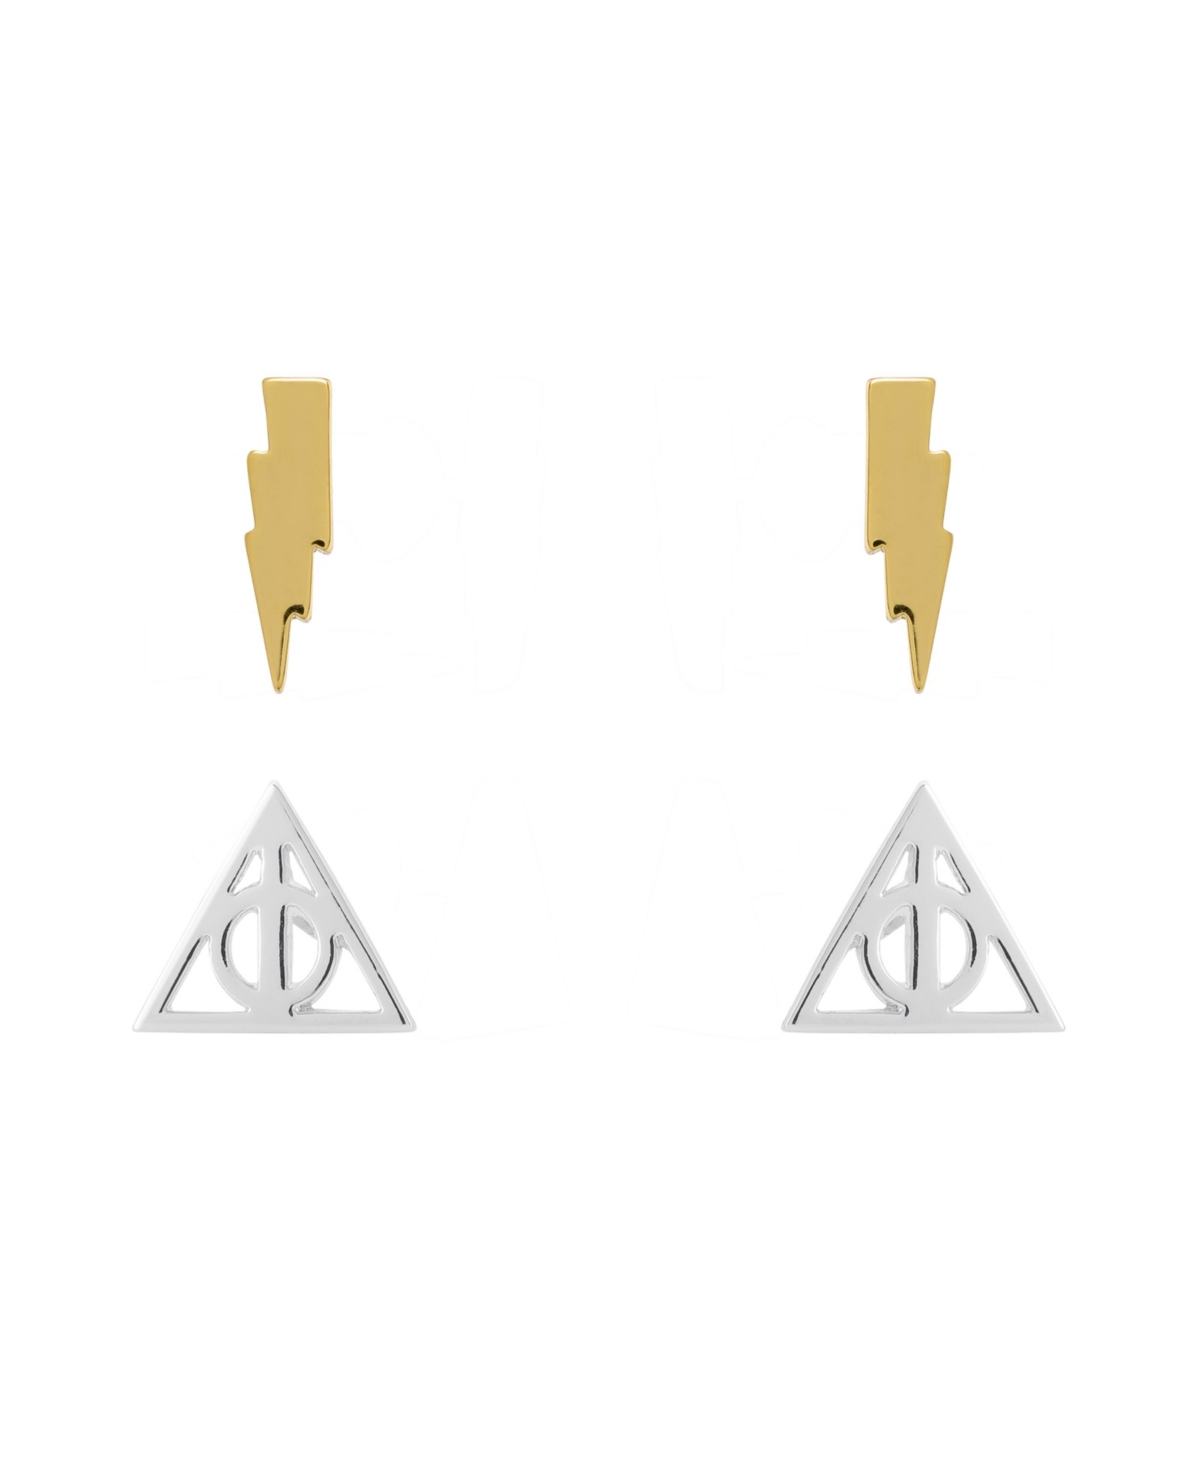 Gold and Silver Flash Plated Stud Earring Sets - Lighting Bolt and Deathly Hallows - 2 Pairs - Silver tone, gold tone